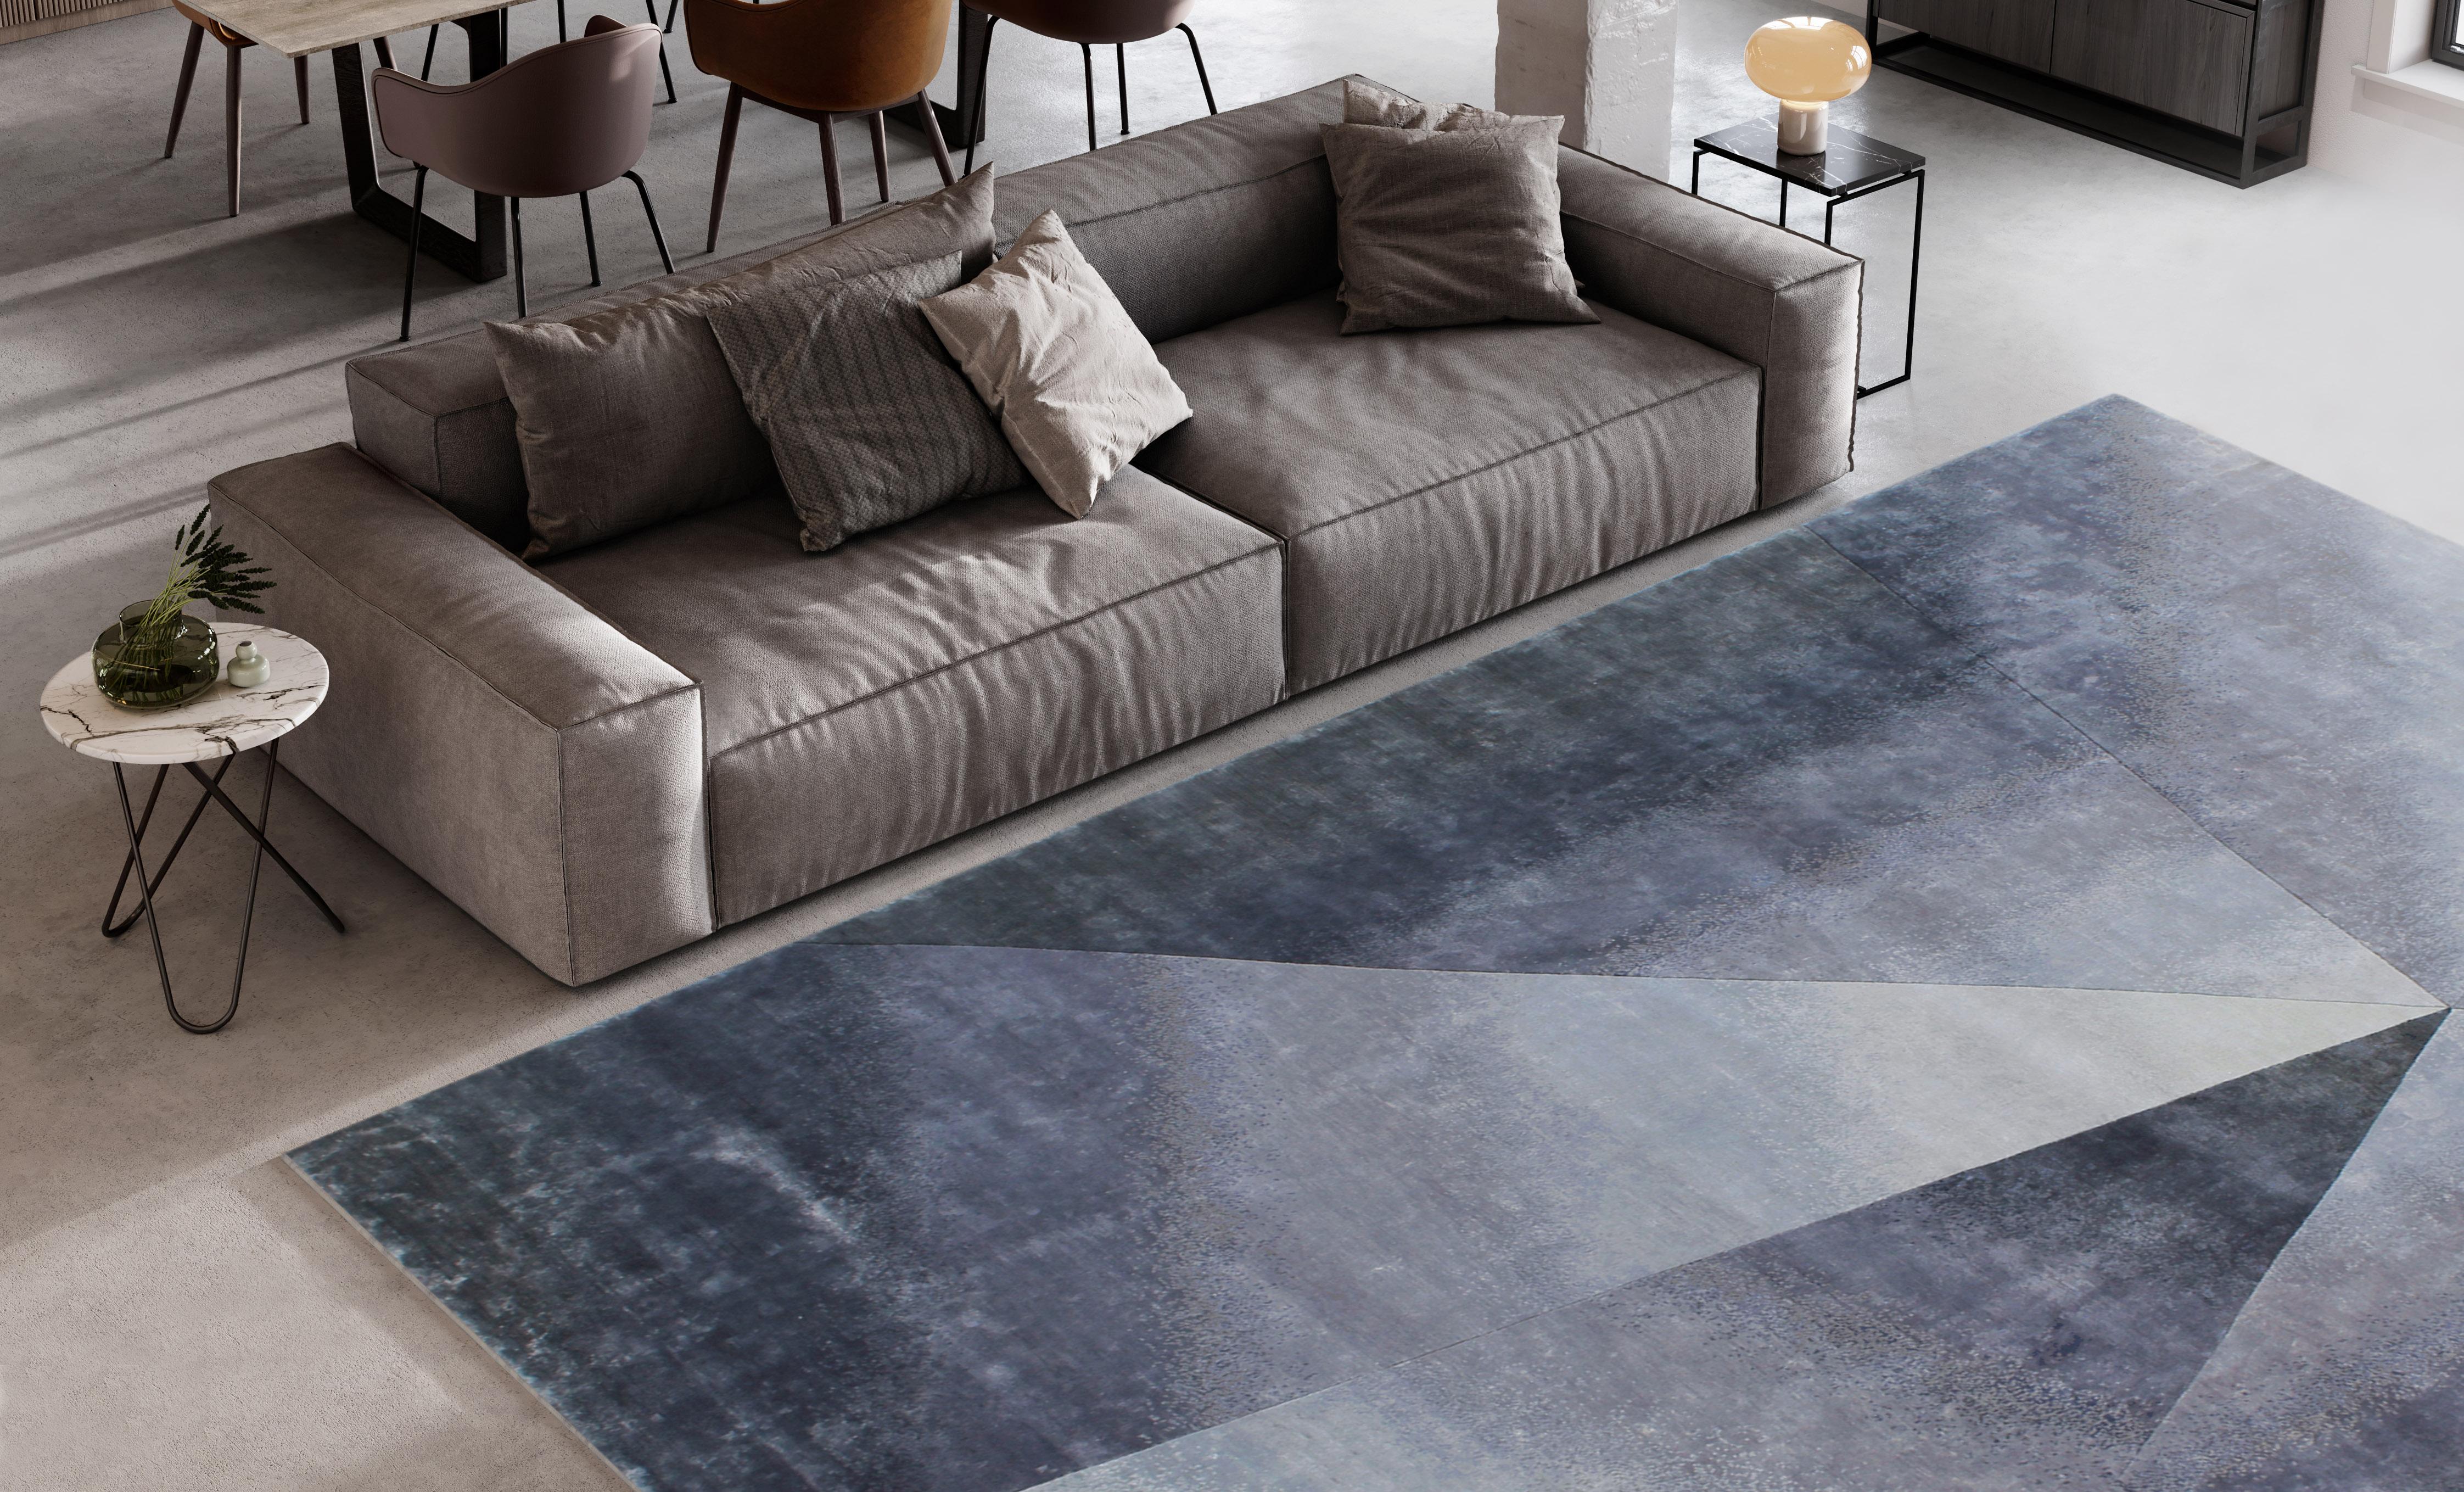 The ‘Urbane’ collection is the epitome of sophistication and refinement, best suited for your home. Every piece in this range of contemporary and modern carpets is a testimony to Hands’ unchanging quality and timeless designs.

Designed by Hands